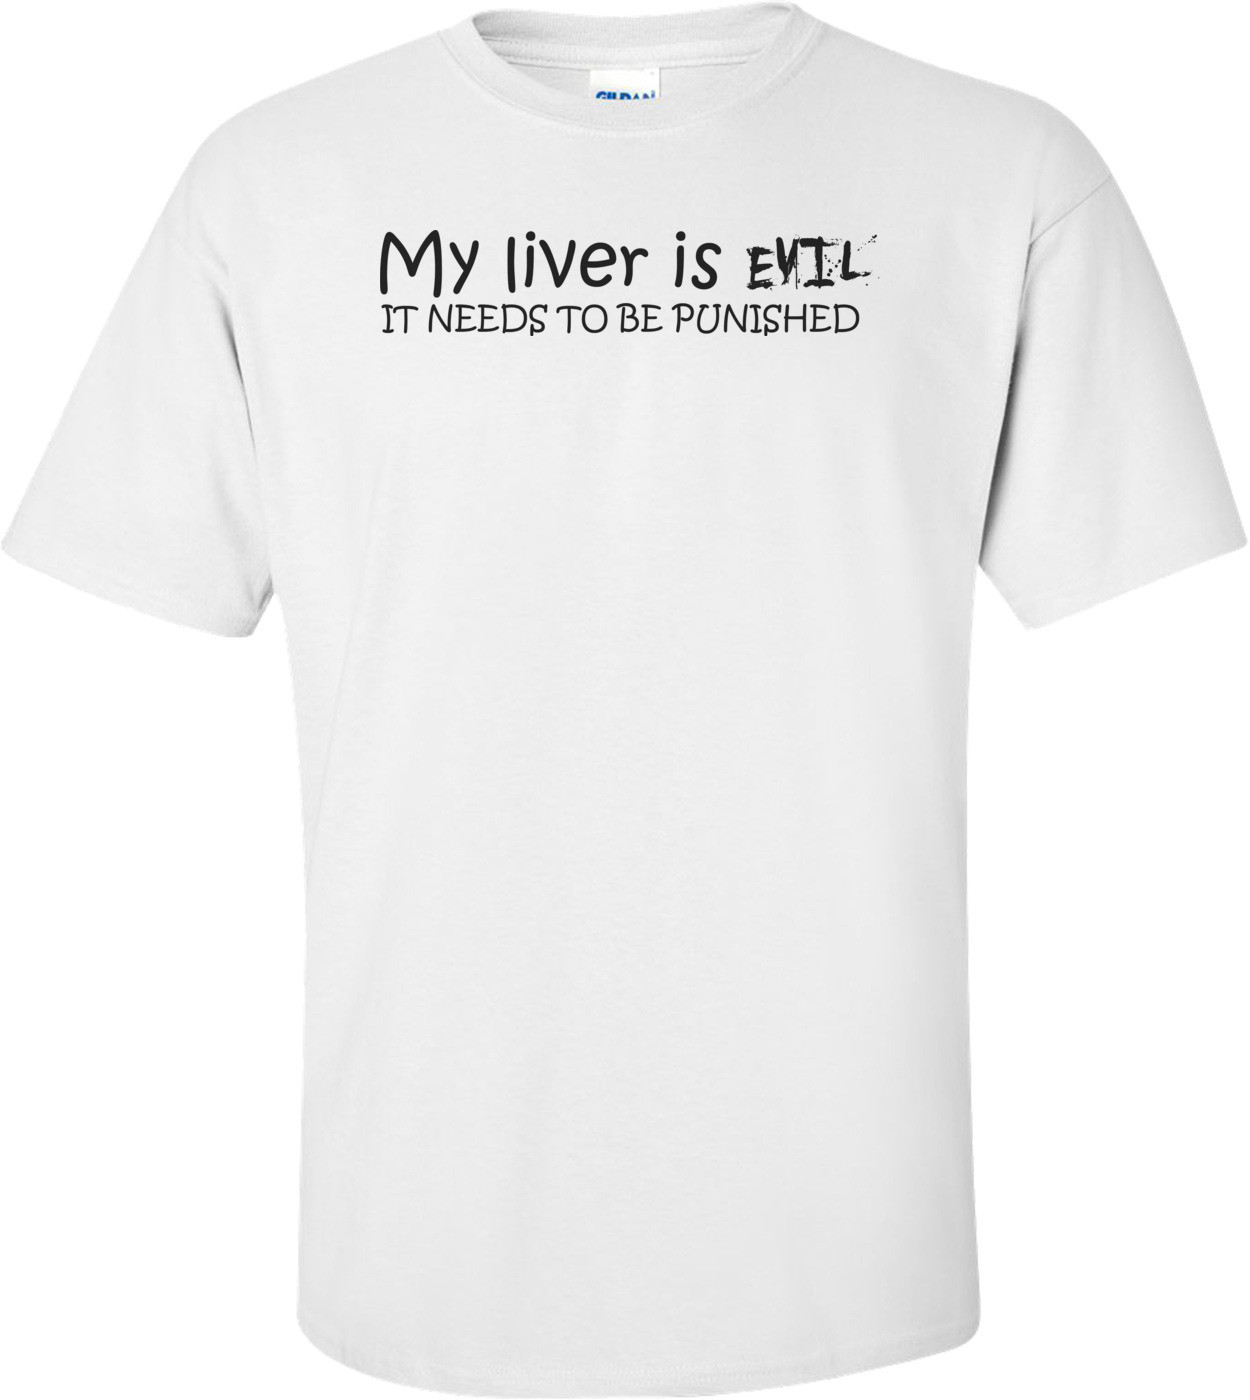 My Liver Is Evil And Needs To Be Punished - Funny Drinking Shirt